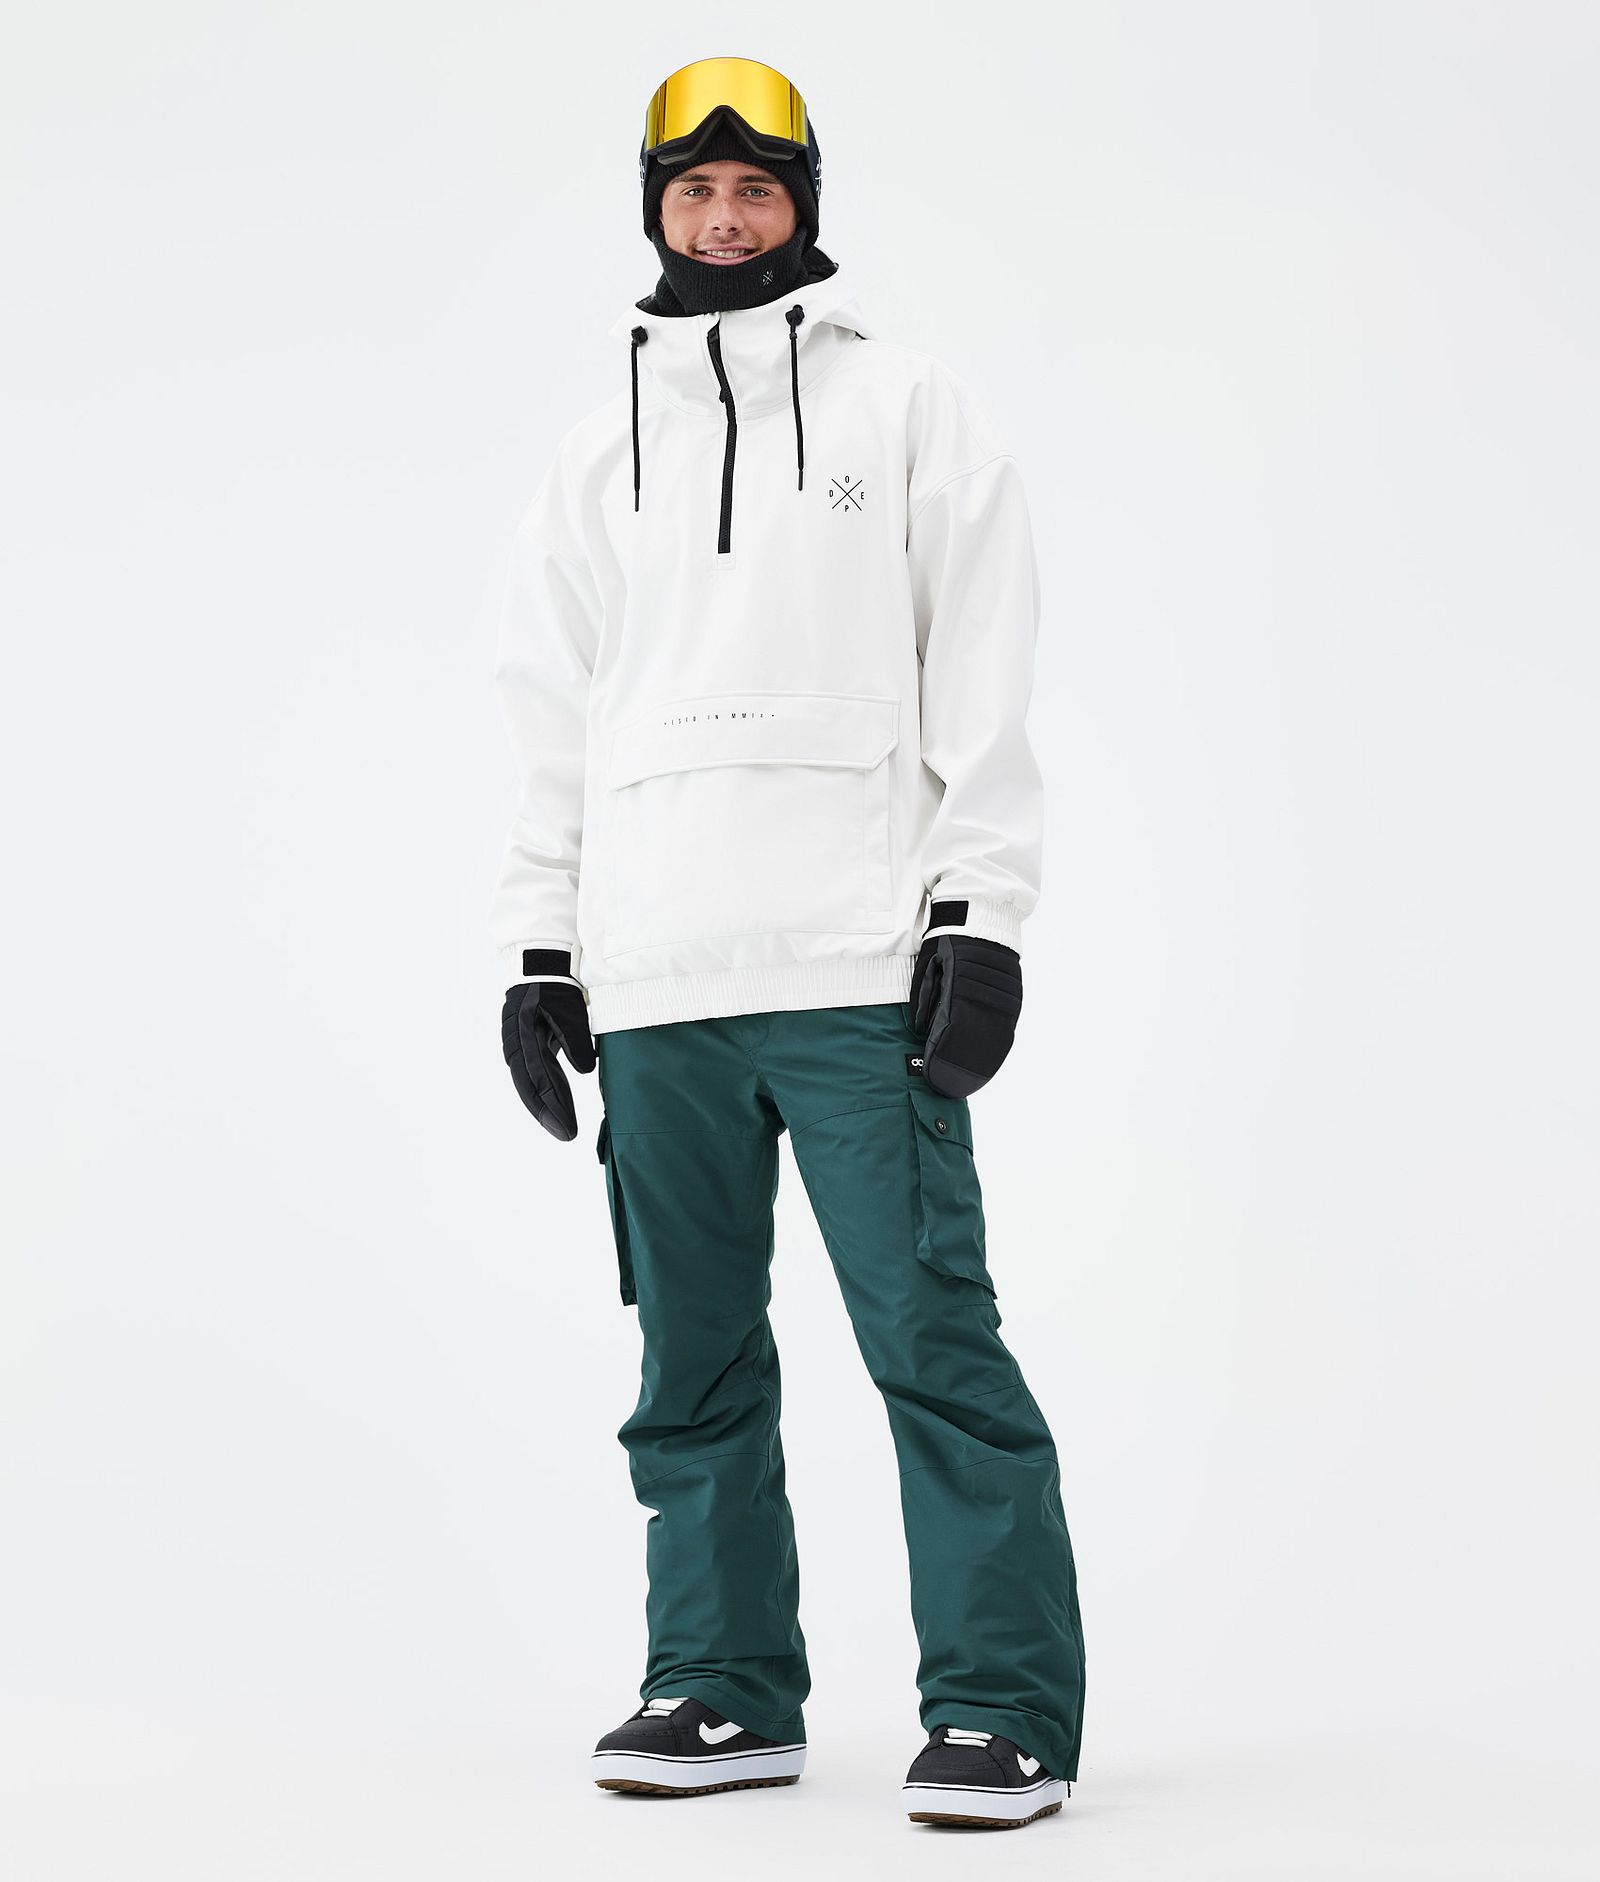 Dope Iconic Pantalones Snowboard Hombre Bottle Green